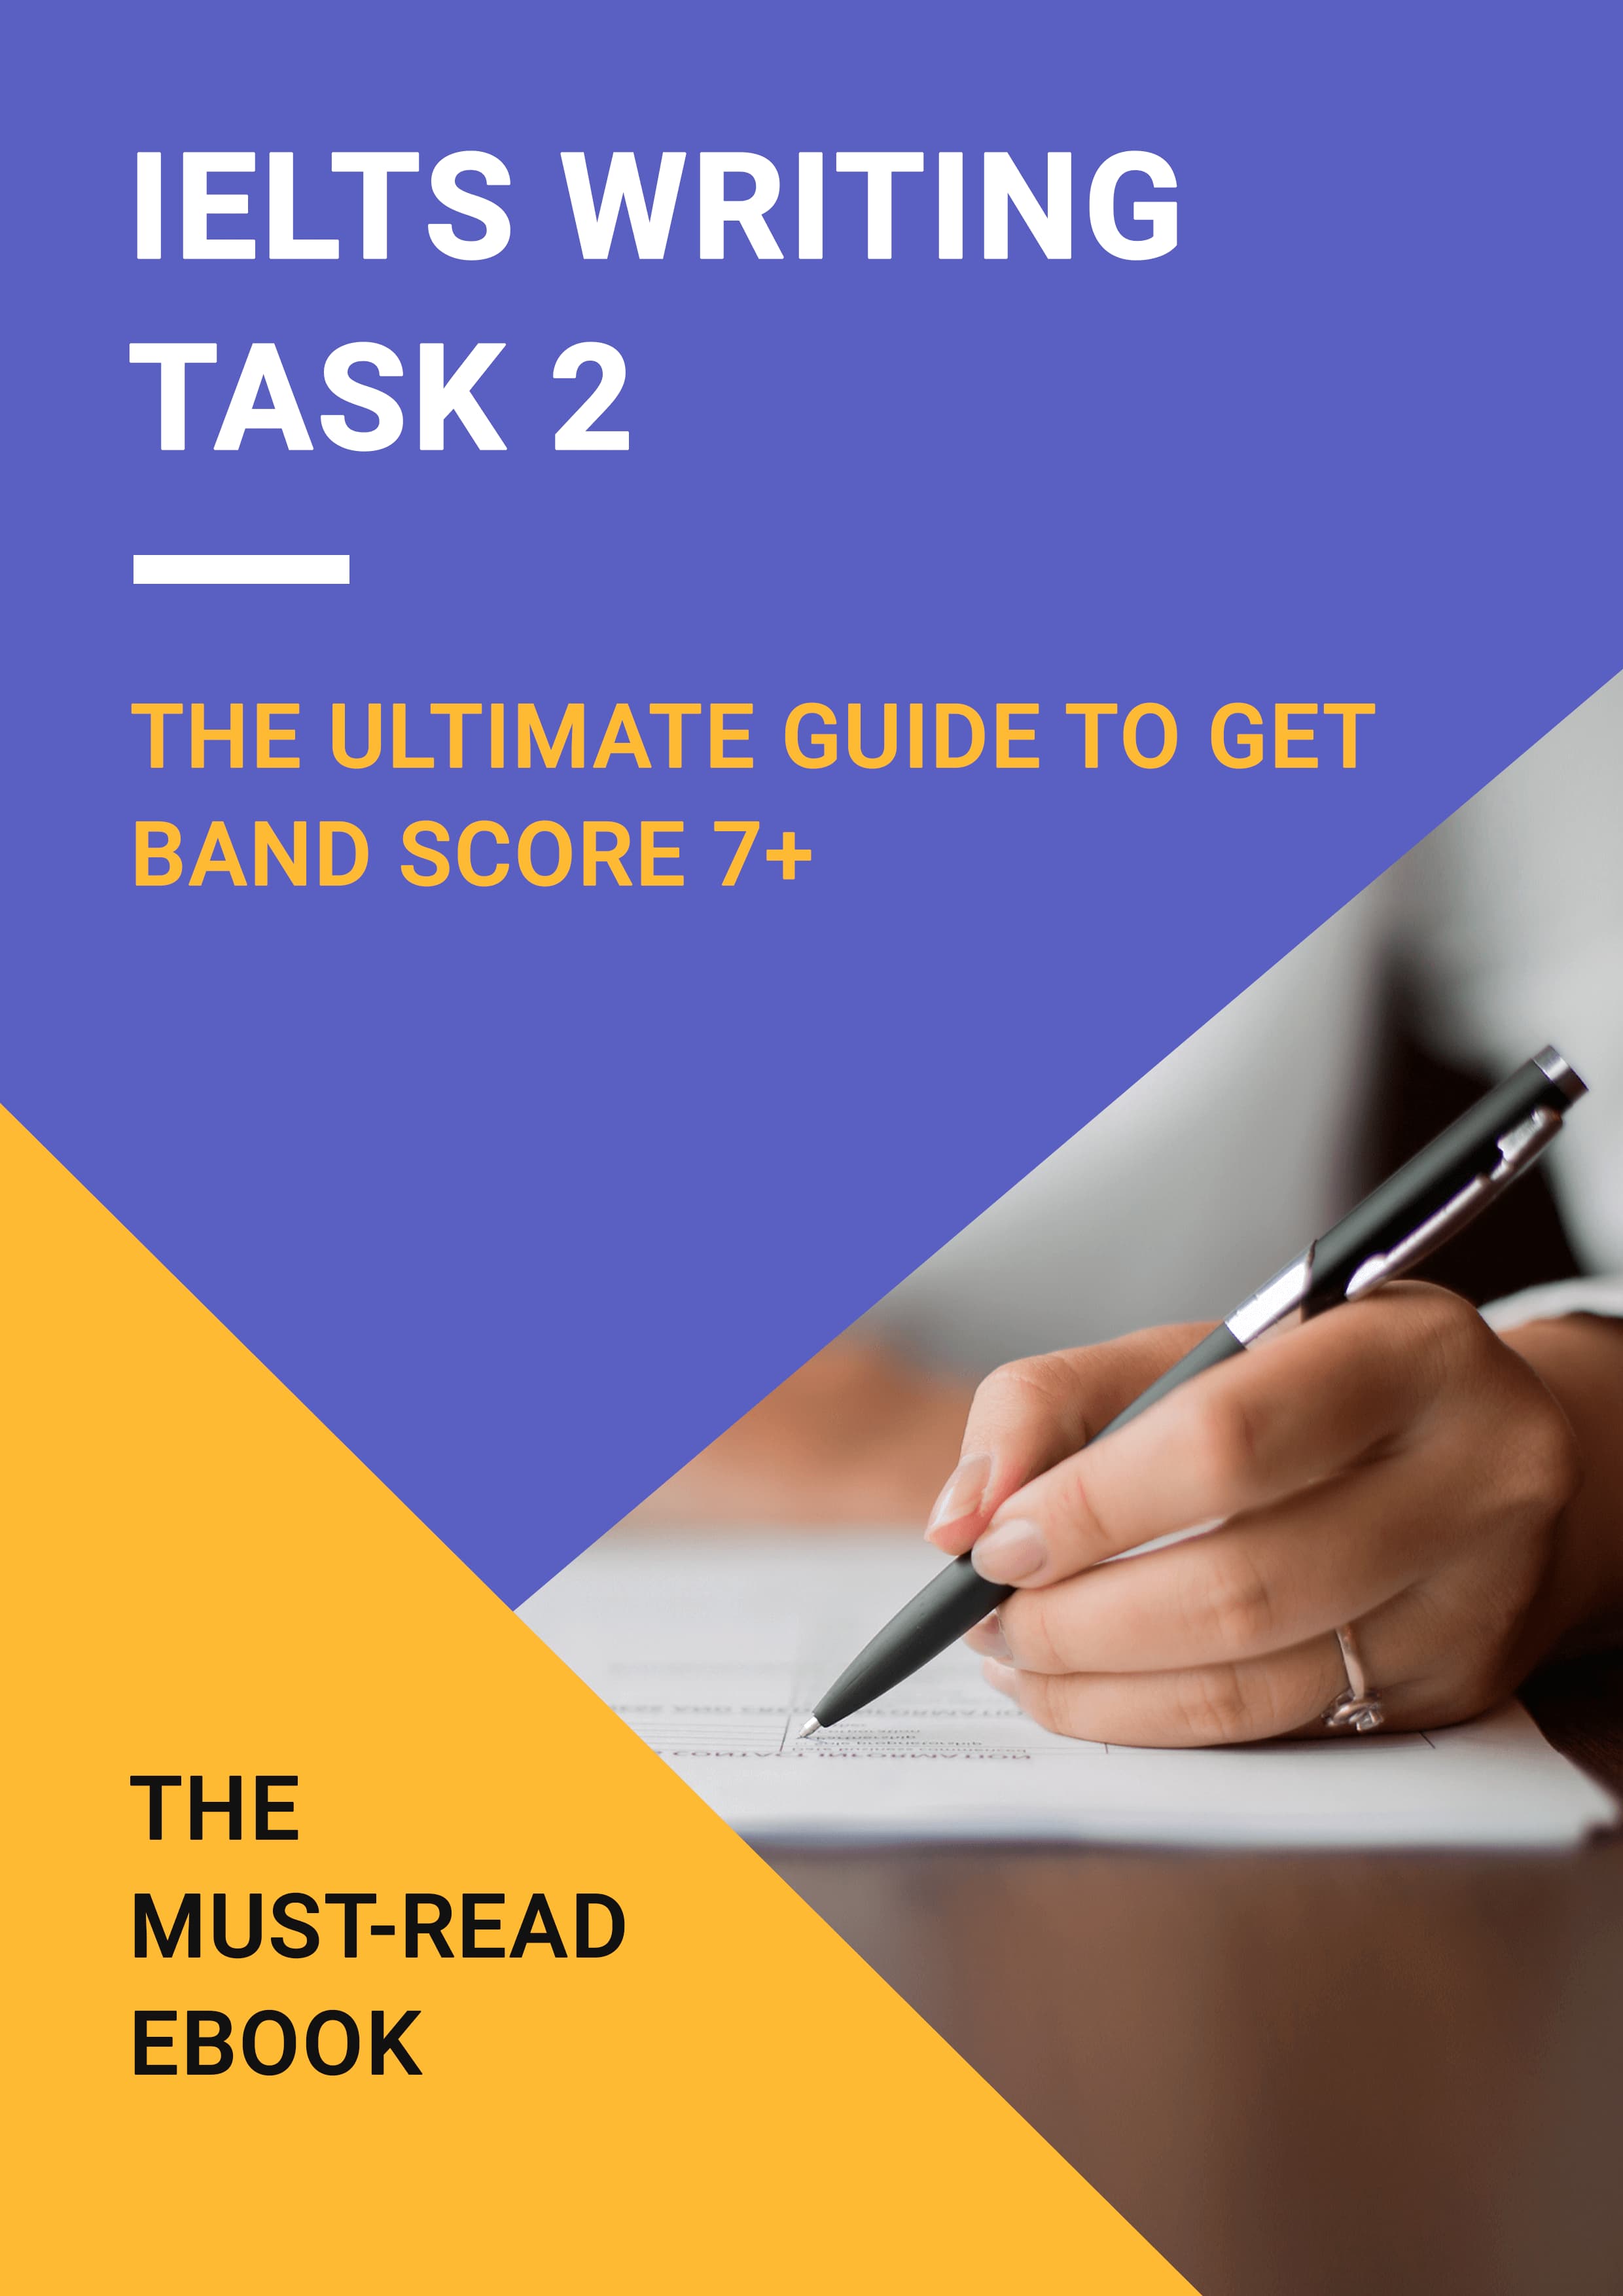 The Ultimate Guide to Get a Target Band Score of 7+